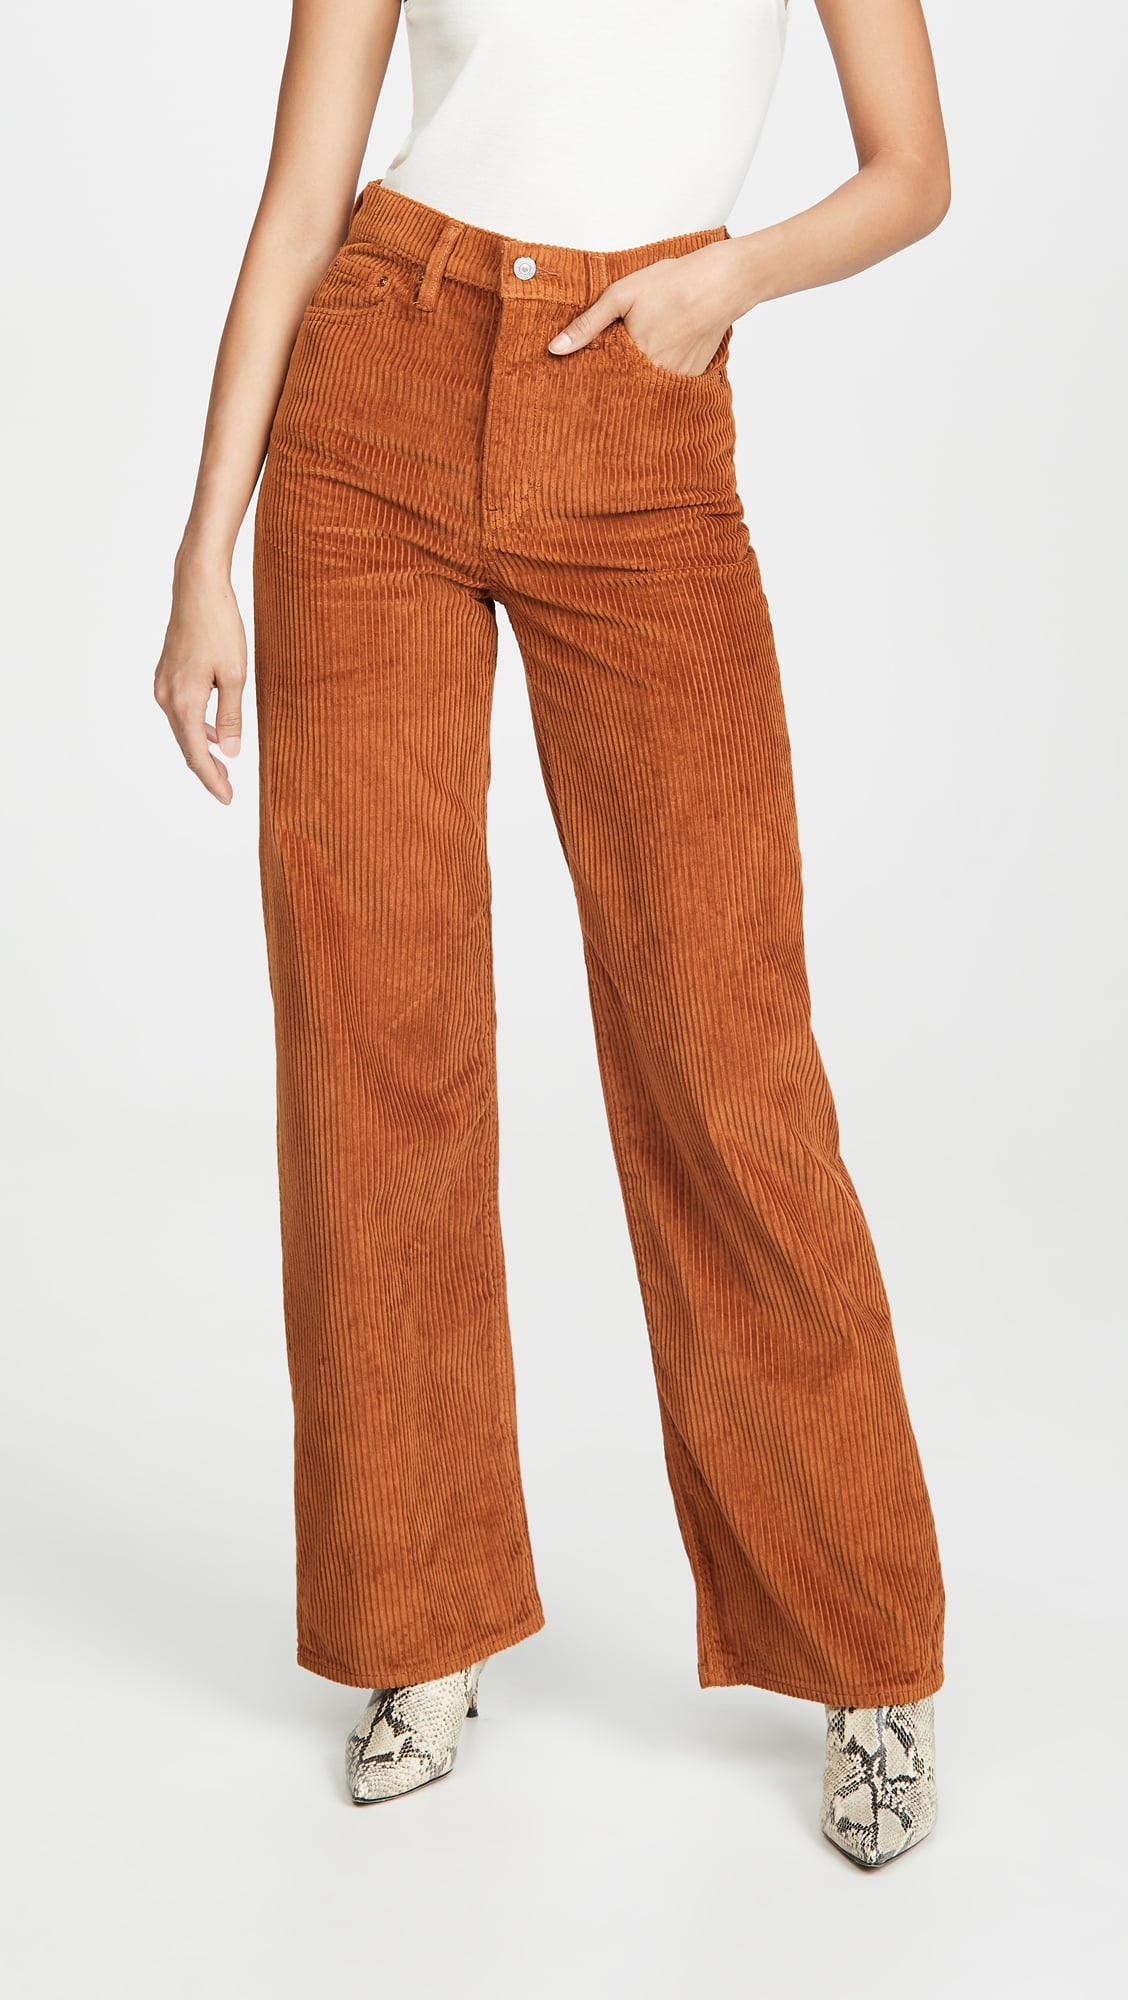 laden plank architect Levi's Ribcage Wide Leg Jeans | 7 Fall Pants Trends More Enticing Than Your  Best Pair of Jeans | POPSUGAR Fashion Photo 31